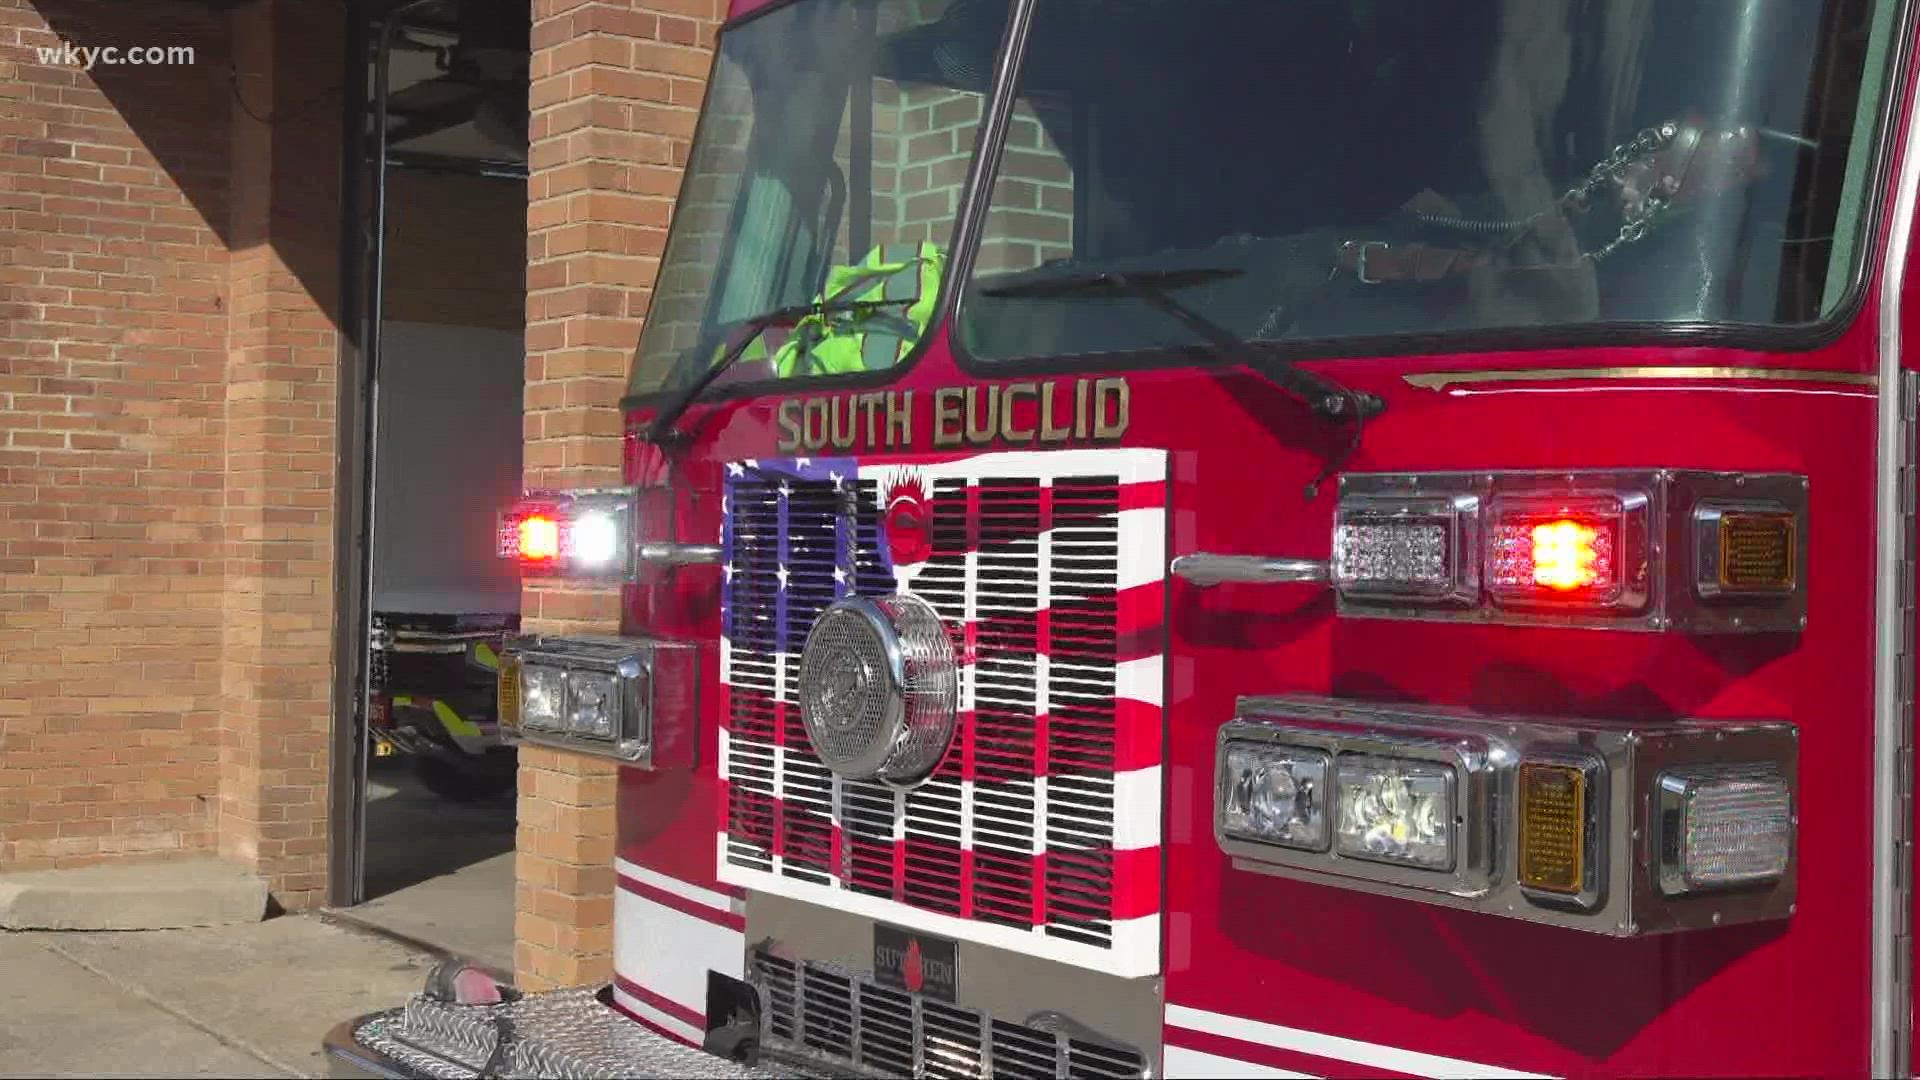 Eight Northeast Ohio departments are working together to source the most qualified candidates to become firefighters.